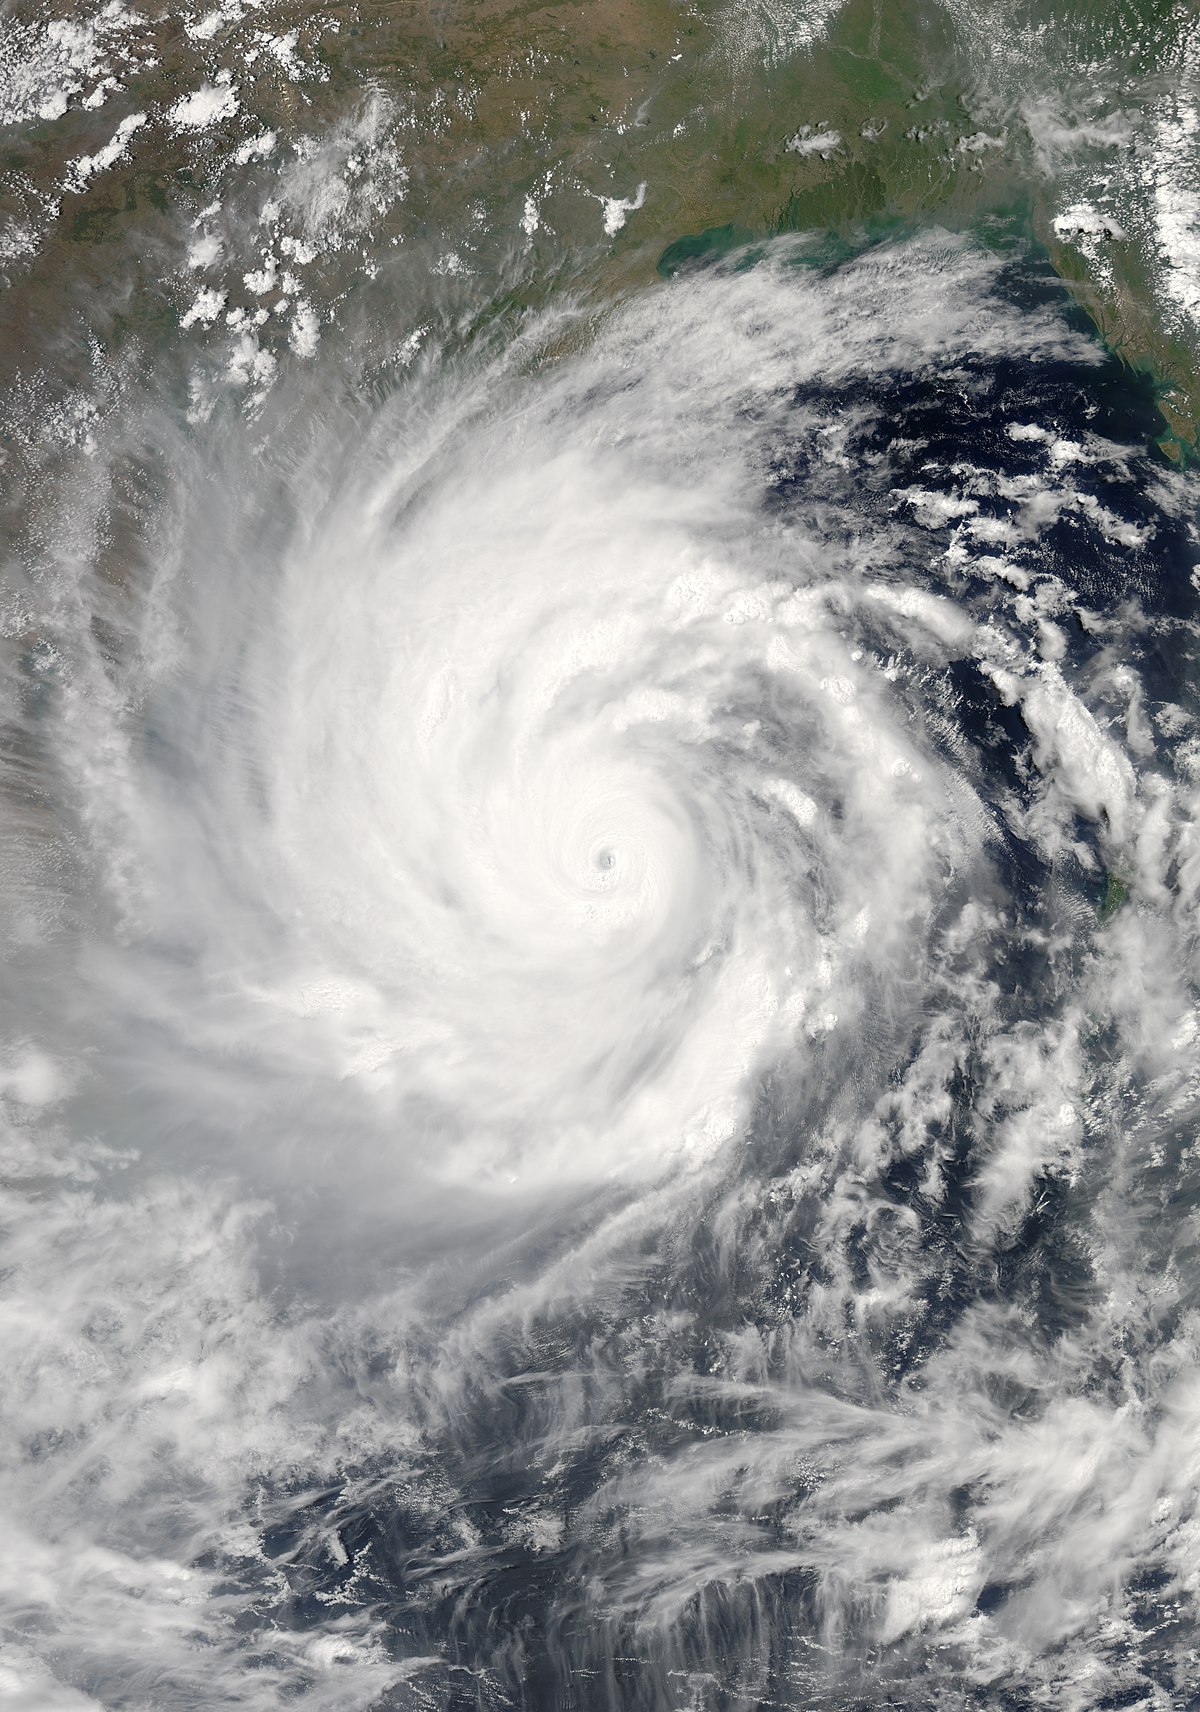 tropical cyclones in india